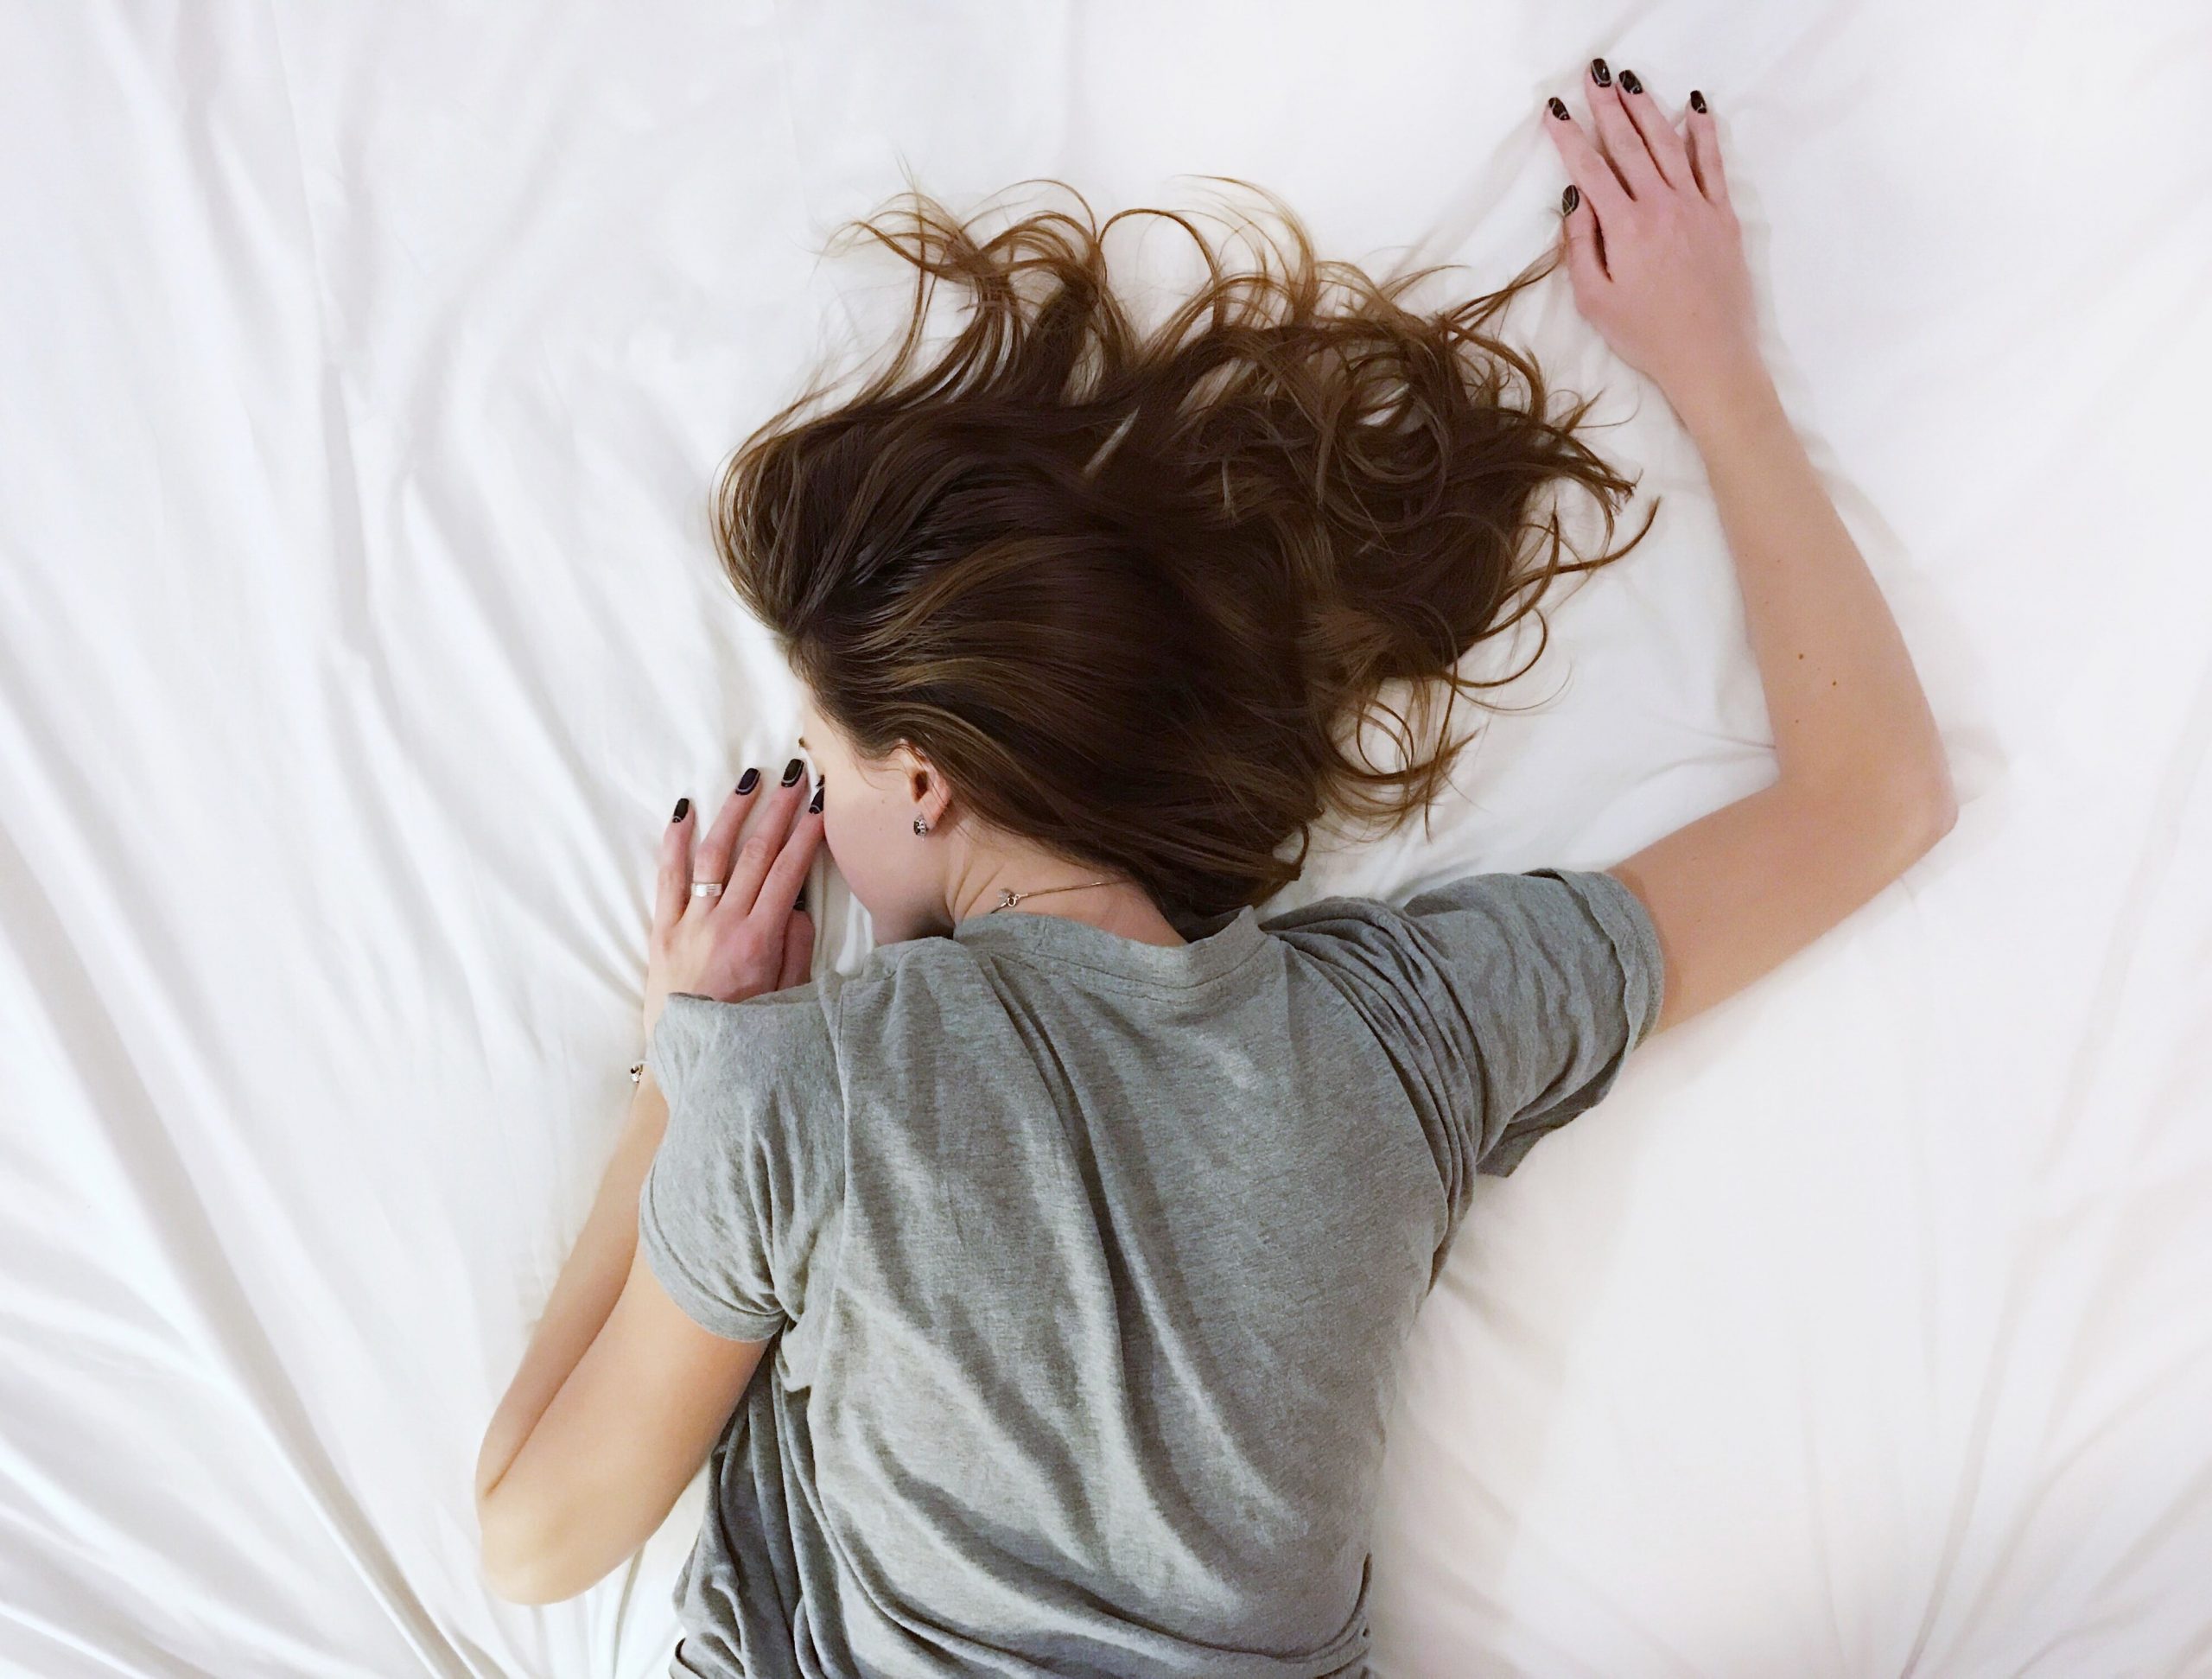 Follow these effective tips to fix your messed up sleep pattern